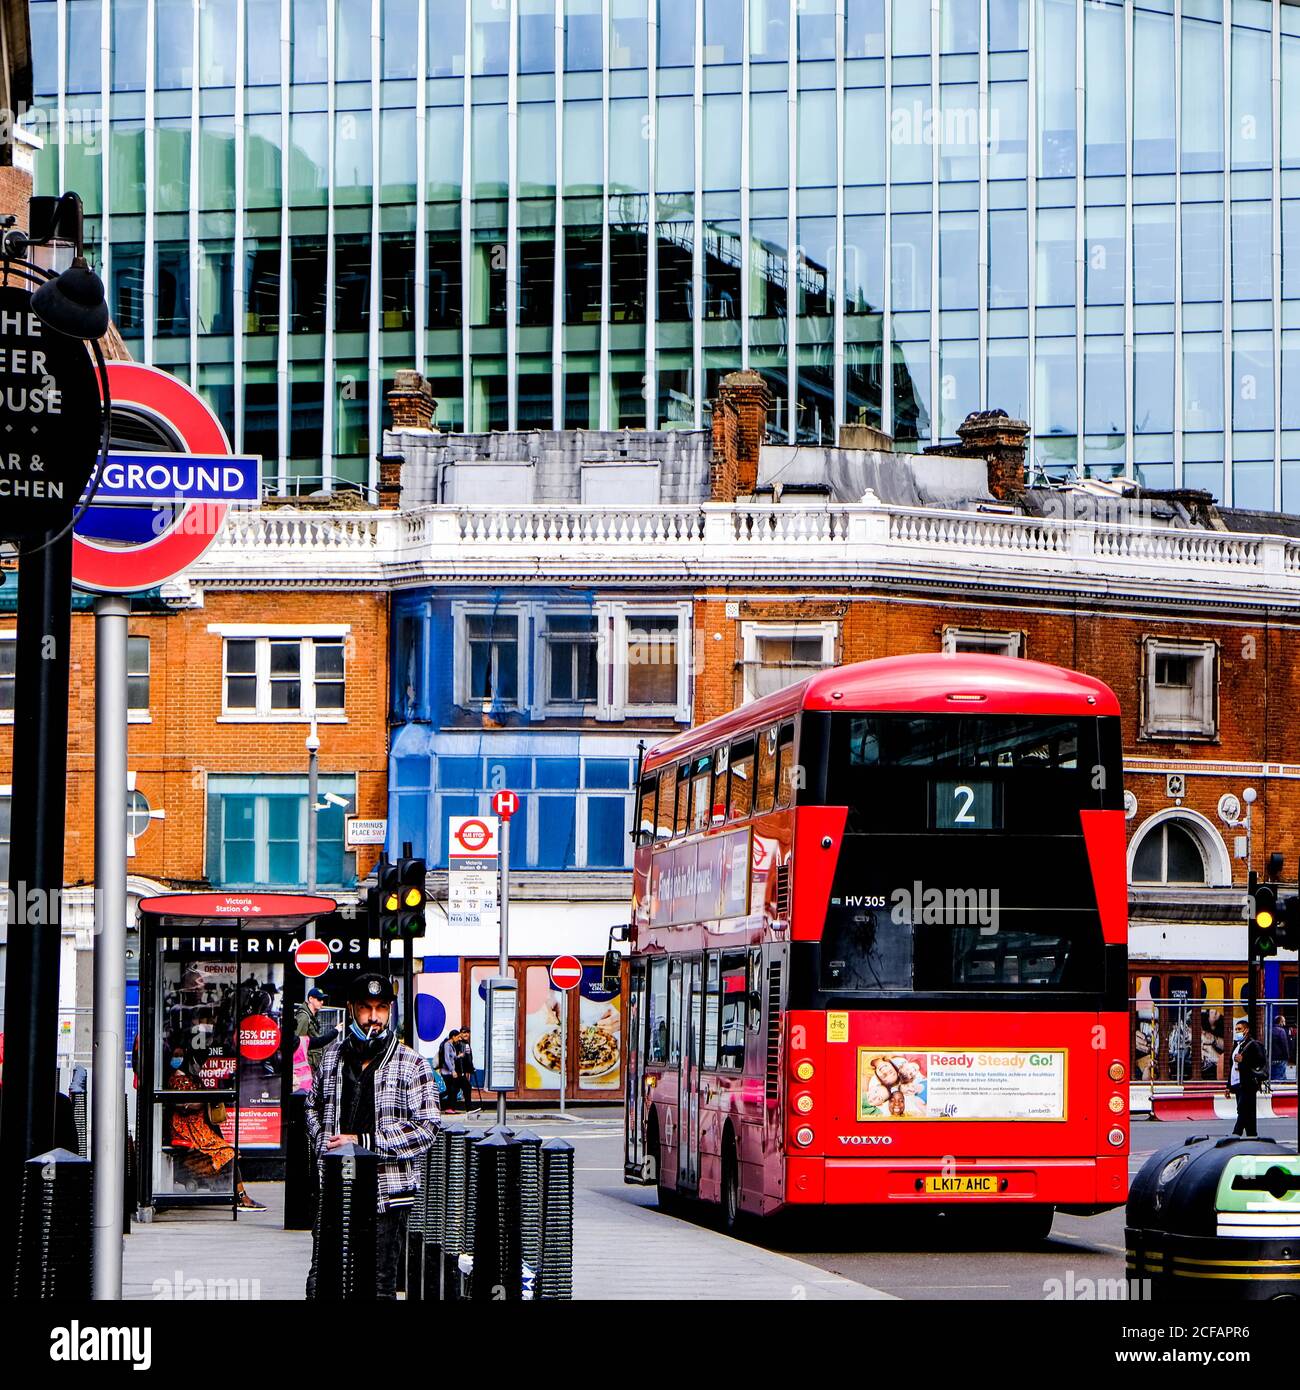 Red Double Decker Bus In Victoria London, UK Against Old And New Office Developments Stock Photo